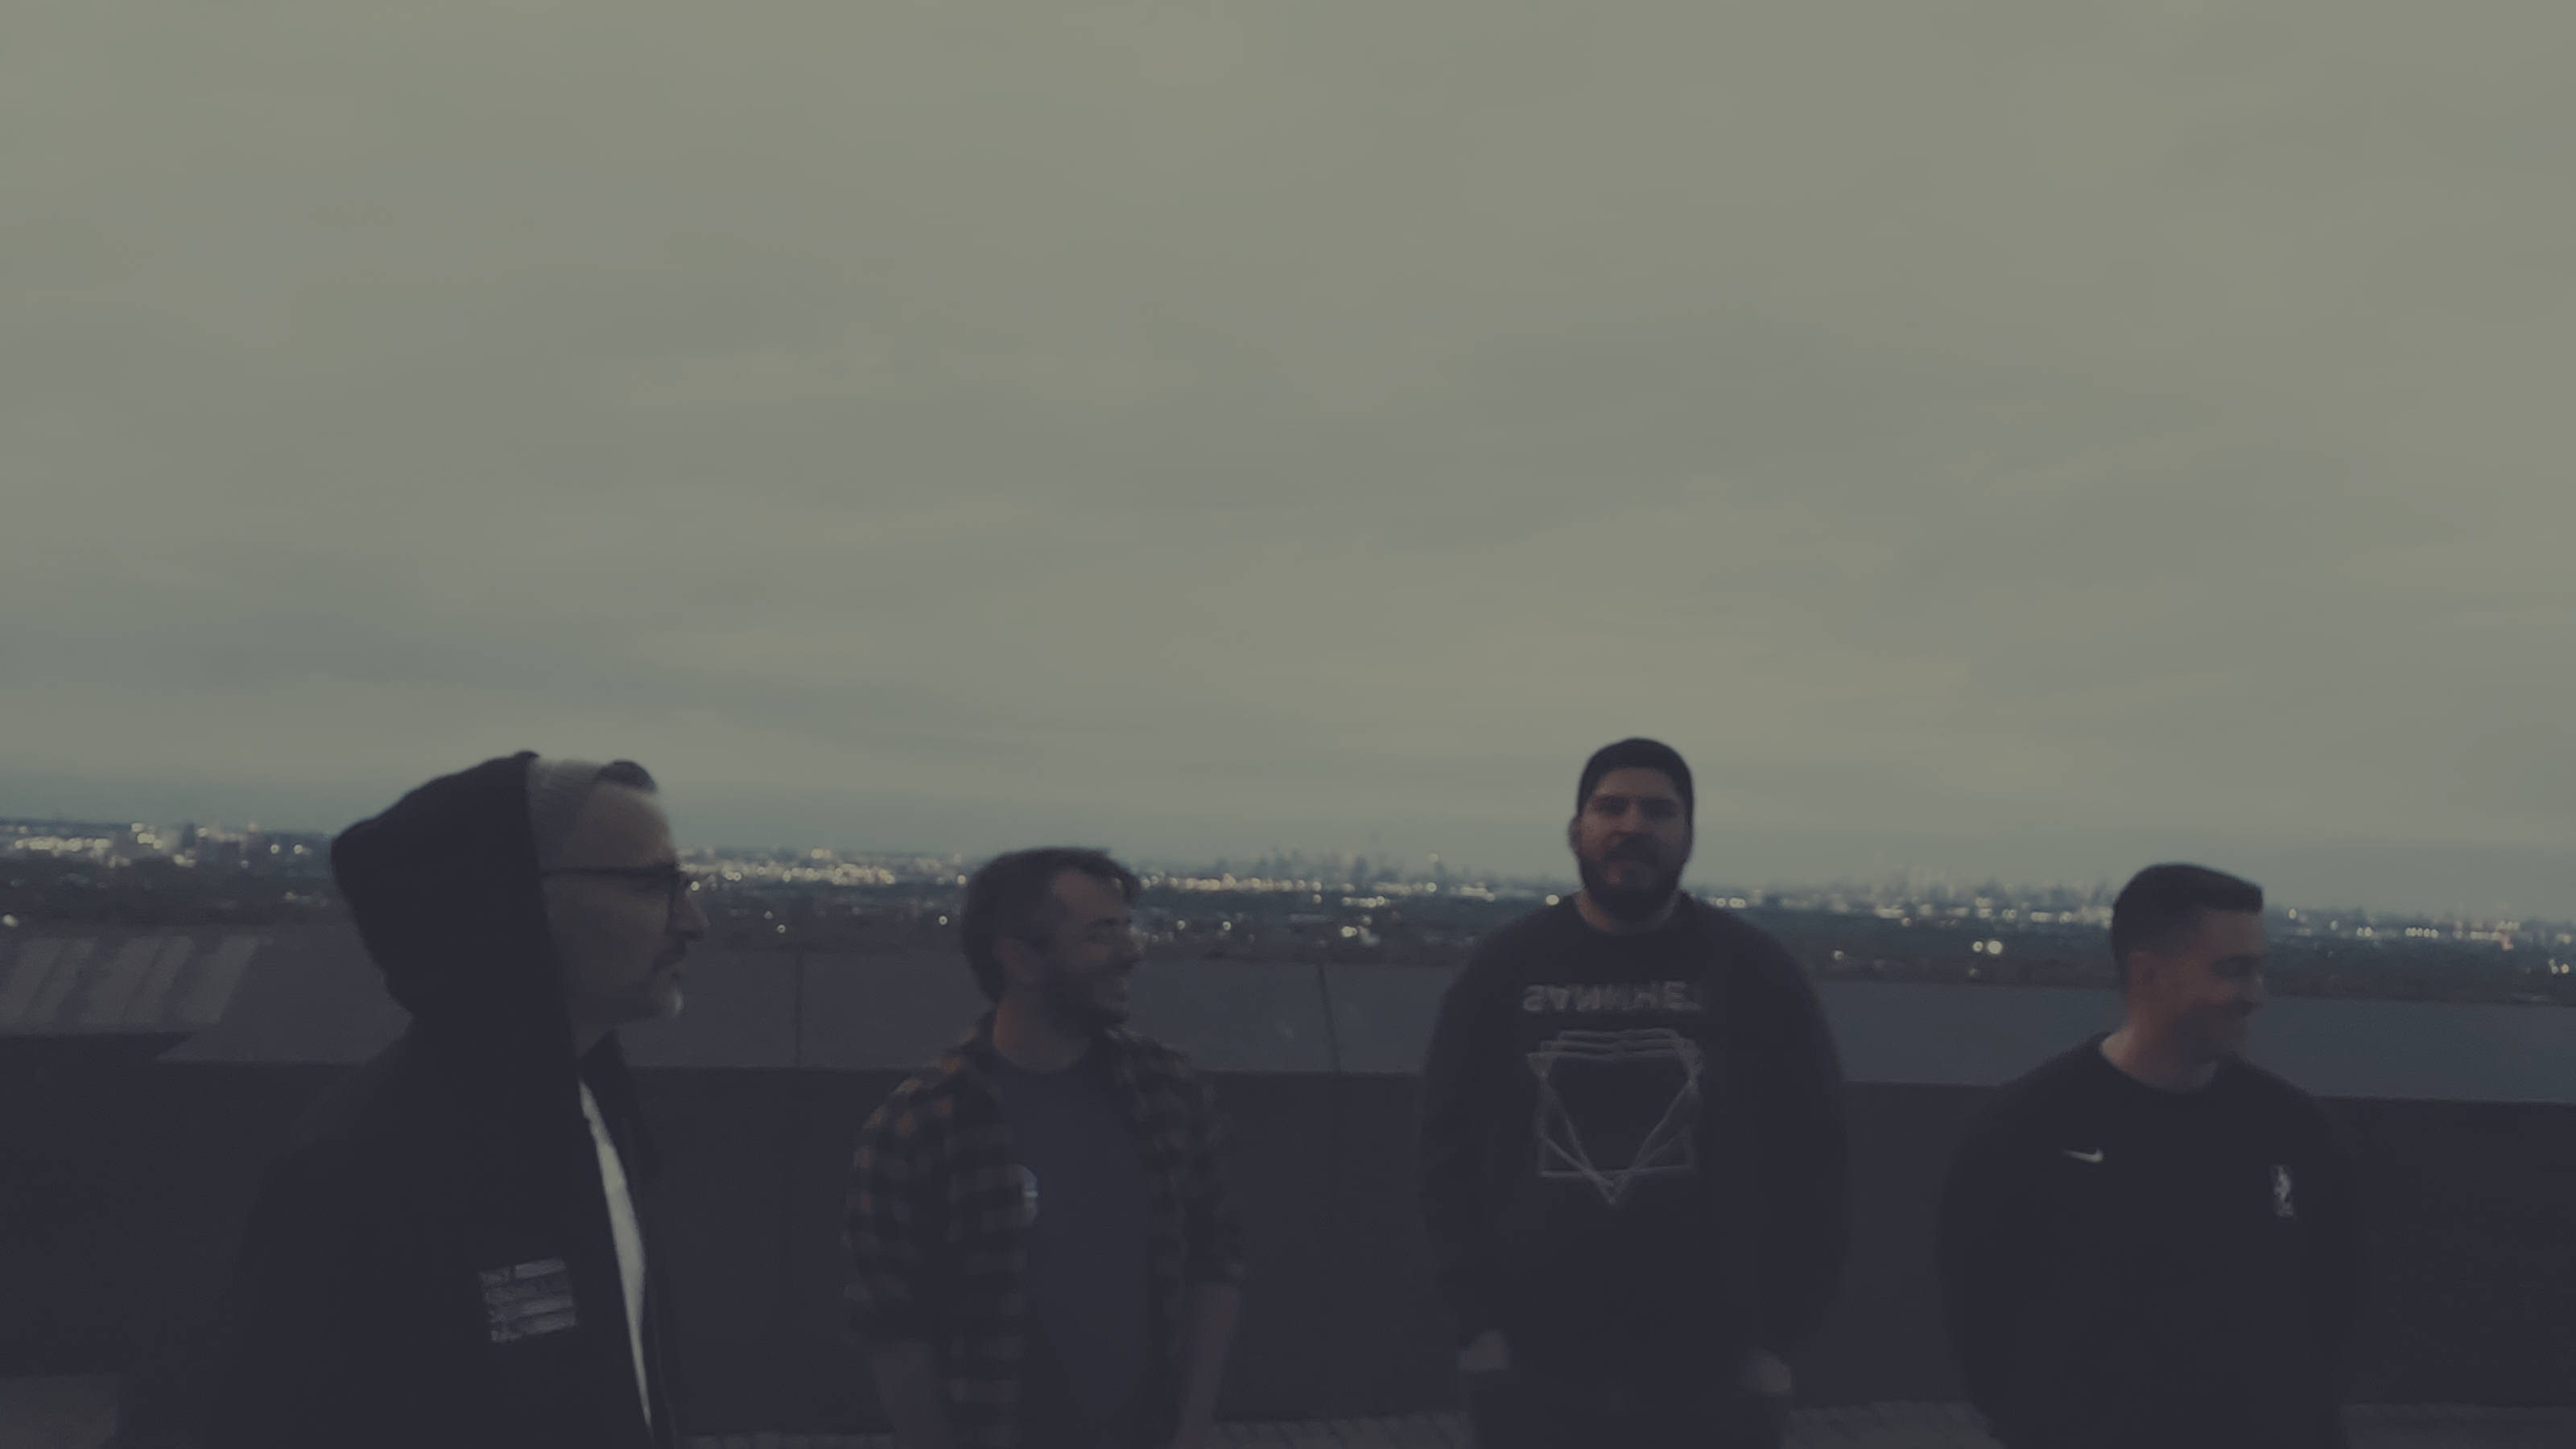 Negative Bliss members look away in front of a city skyline while Jonathan Hernandez looks ahead